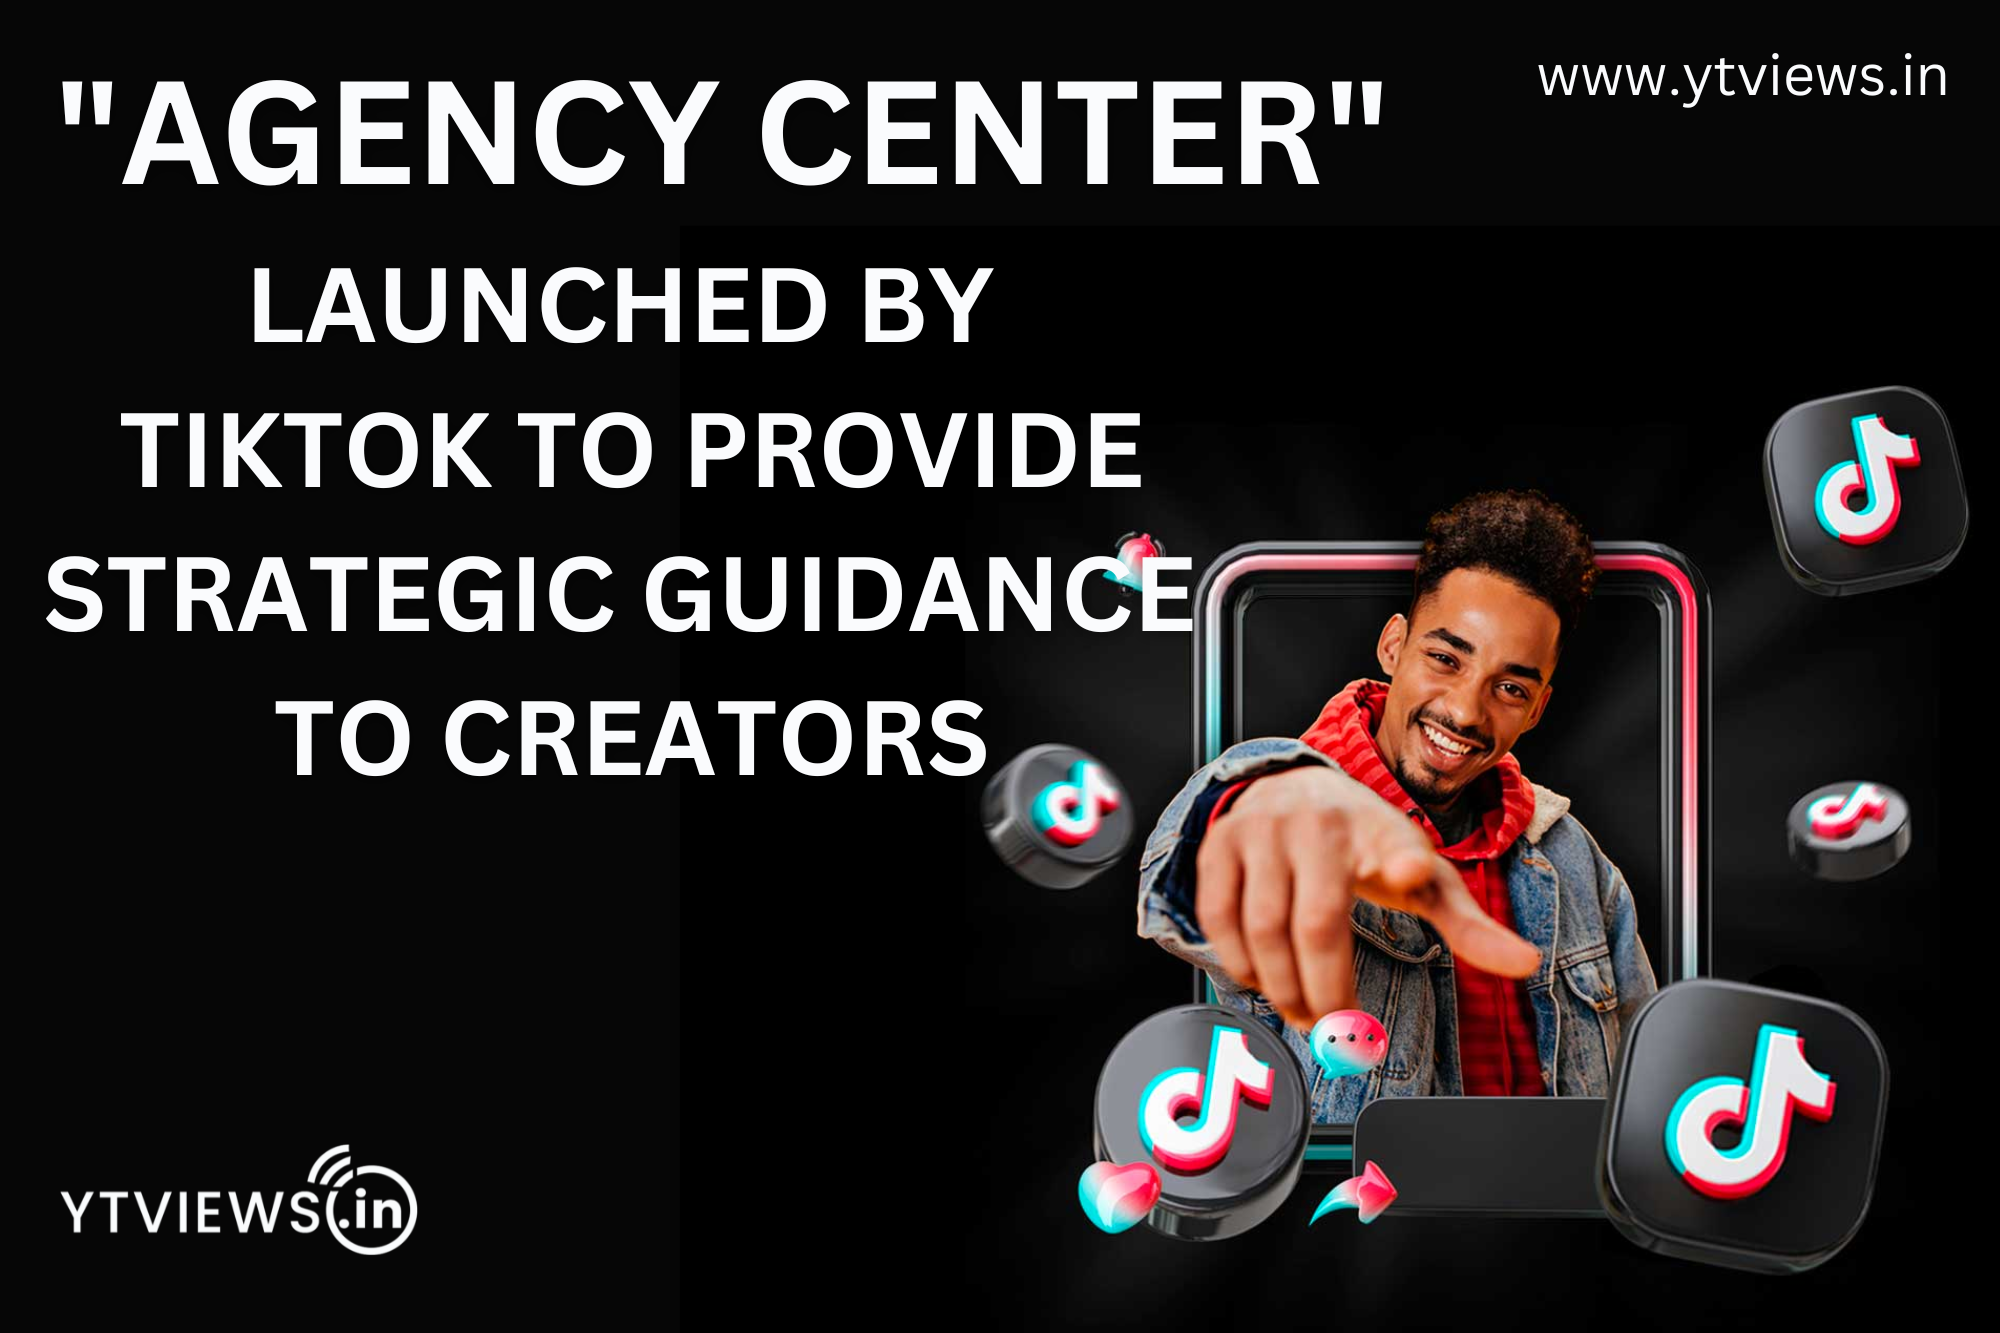 ‘Agency Center’ launched by TikTok to provide strategic guidance to creators